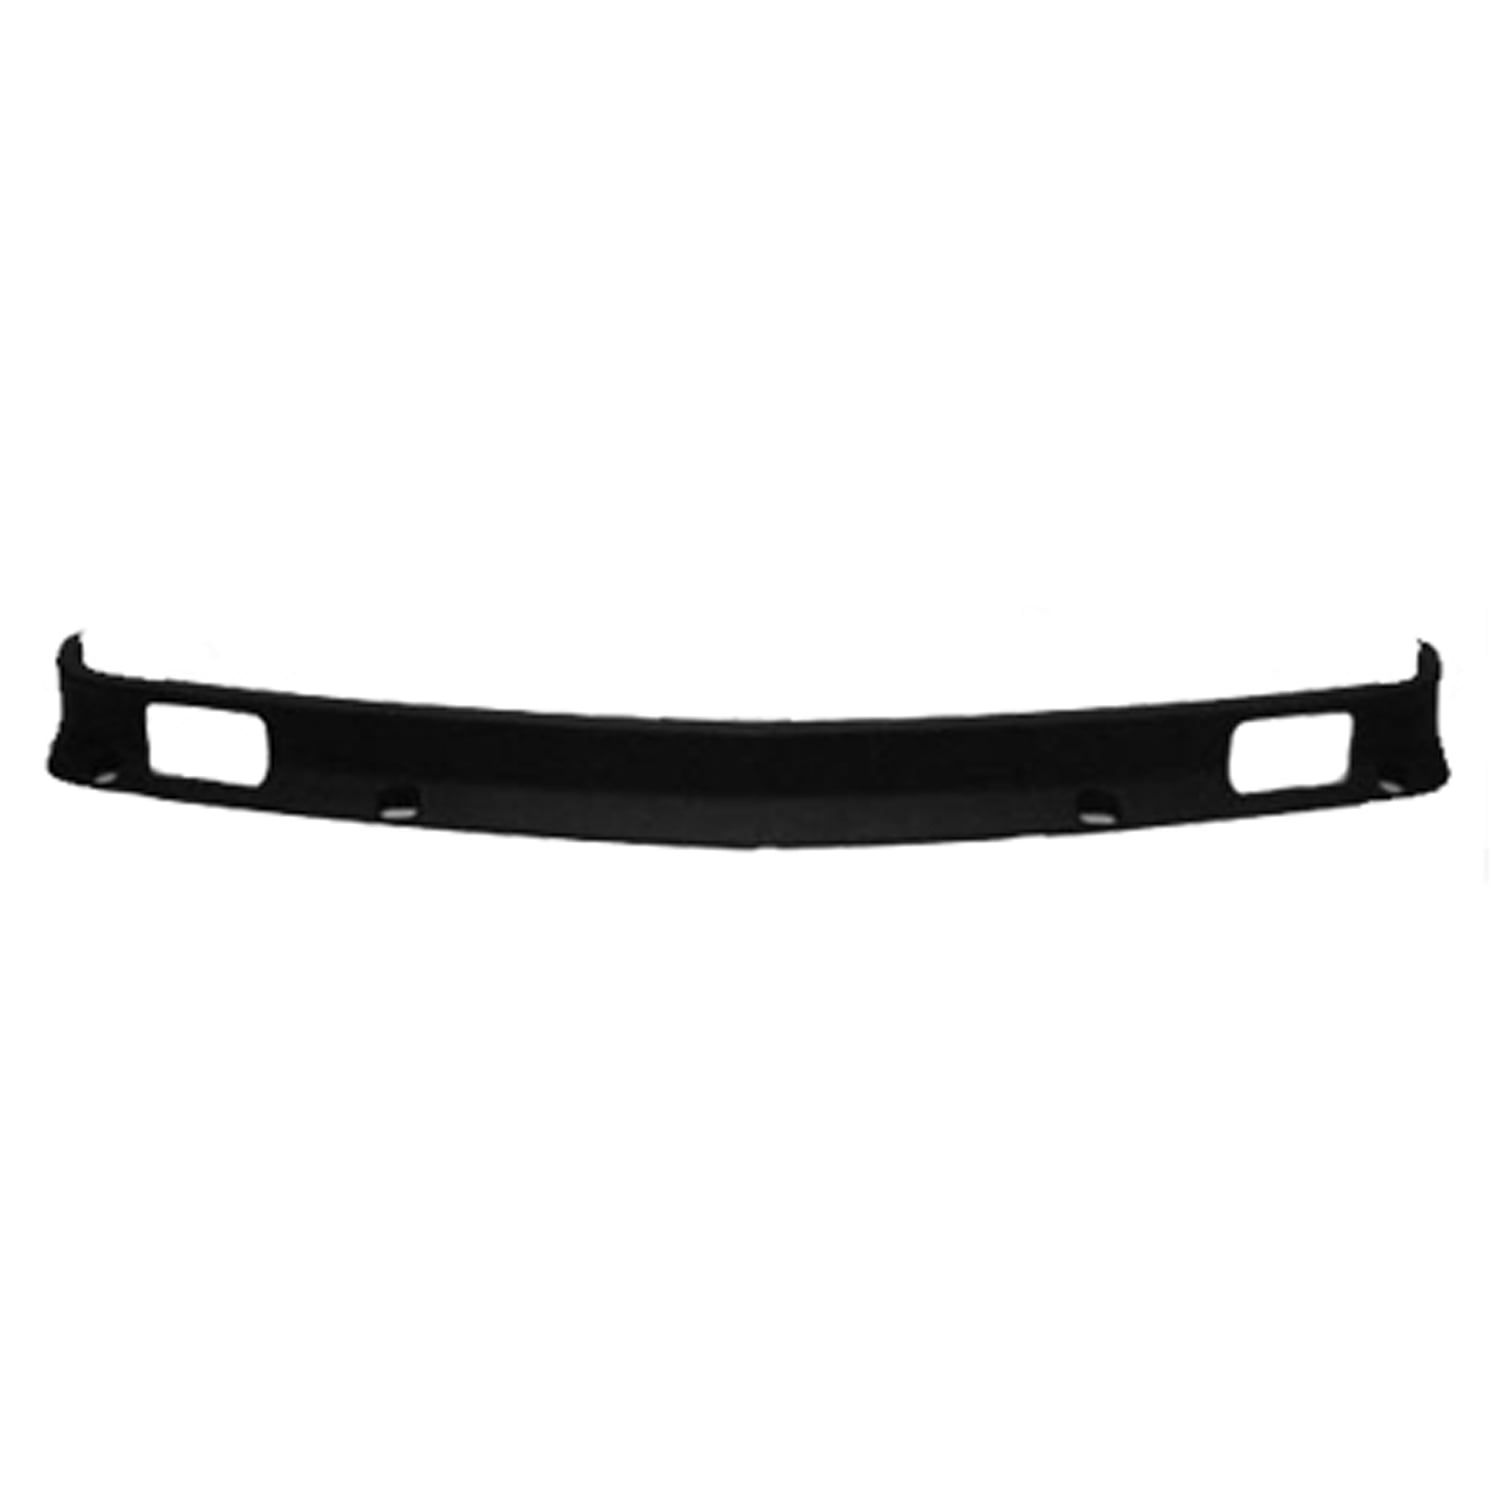 Crash Parts Plus Front Lower Air Dam Deflector Valance Apron for Ford Excursion F-250 SD F-350 SD 